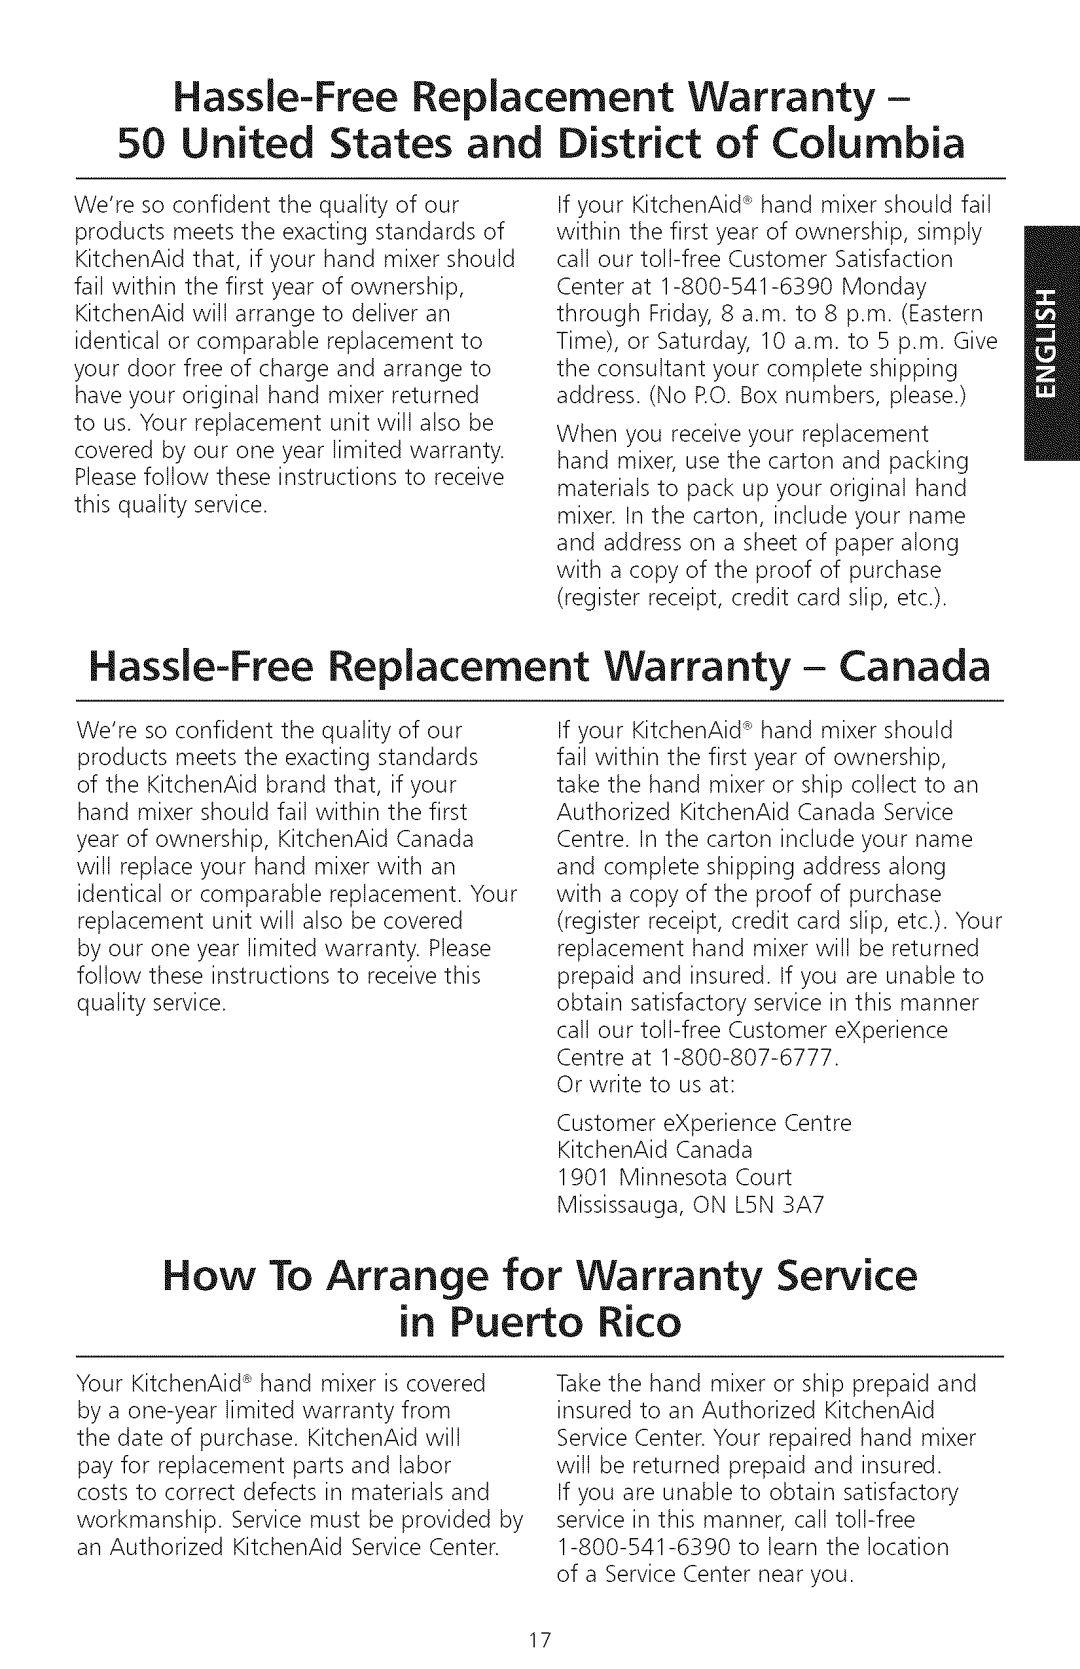 KitchenAid KHM720, KHM920 manual Hassle-Free Replacement Warranty, United States and District of Columbia 